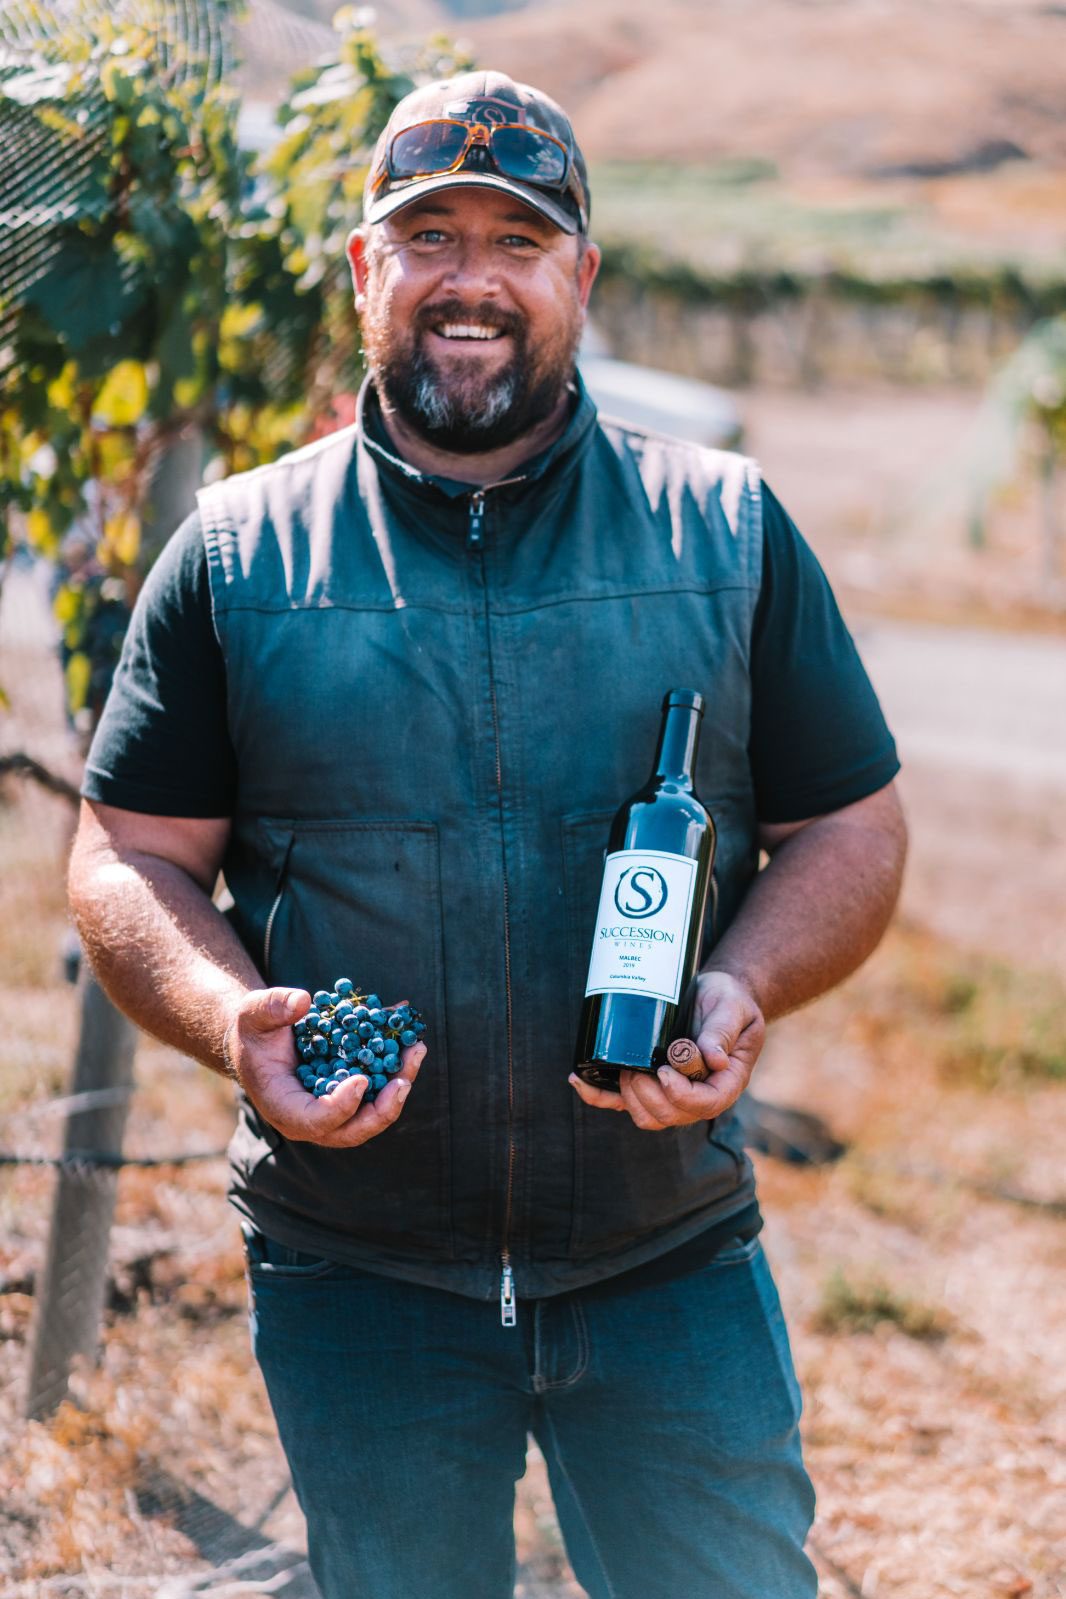 Brock Lindsay holding grapes and a bottle of wine in the vineyard